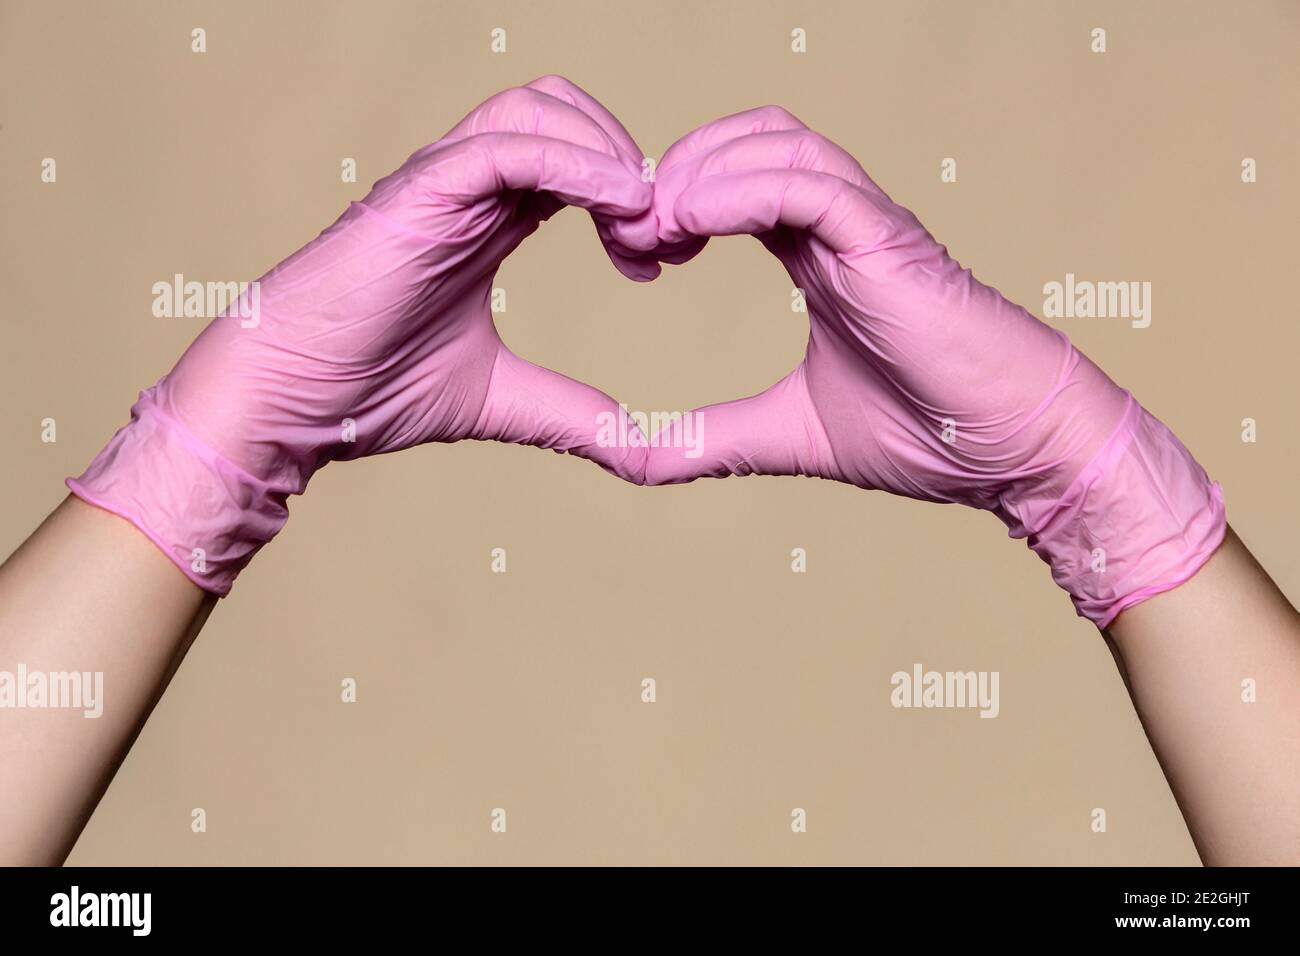 Hands in pink protective gloves forming heart shape Stock Photo